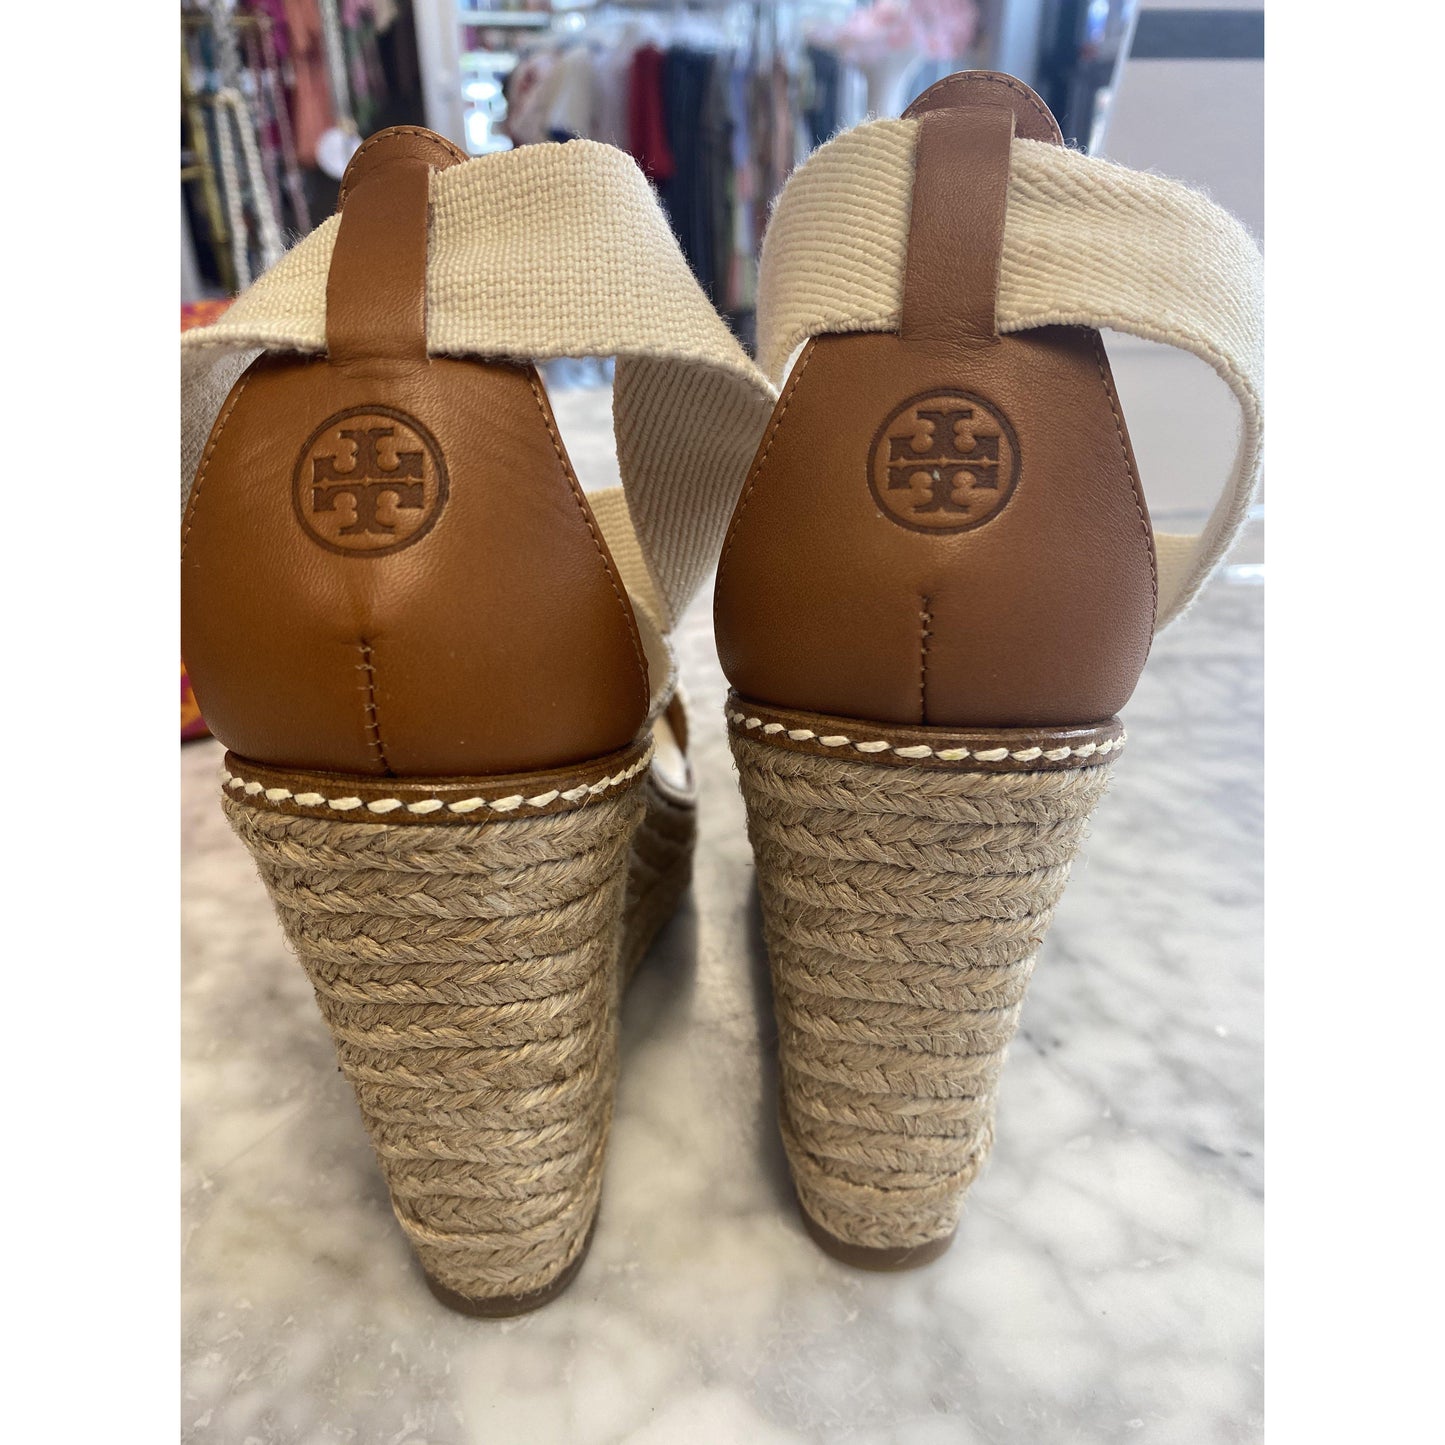 Tory Burch Adonis Espadrille size 9